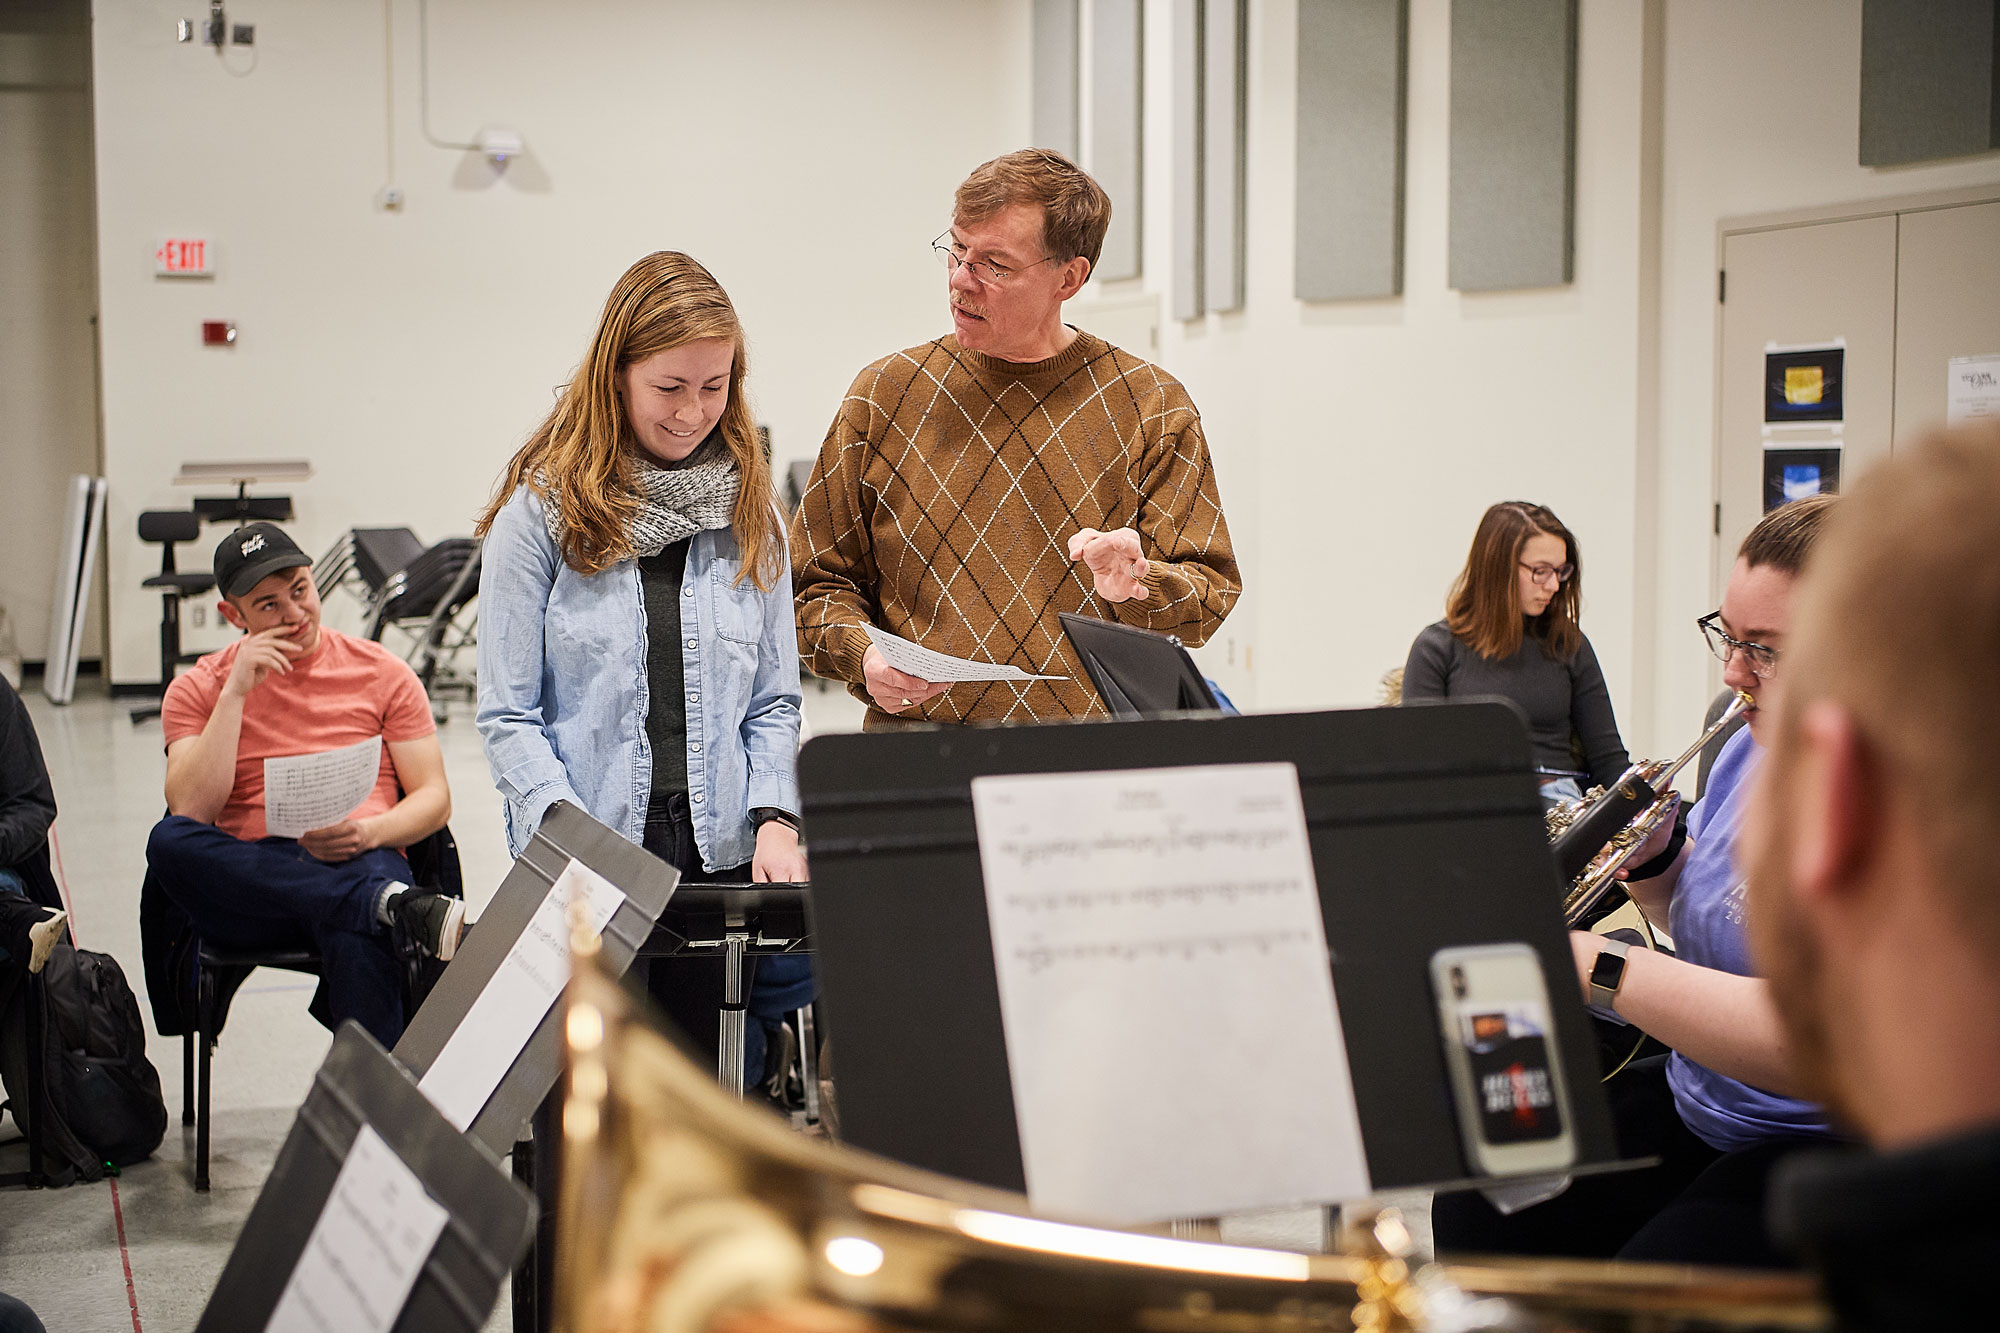 Ken Fuch, professor of music, teaches a class on music arranging for music educators at the Music Building